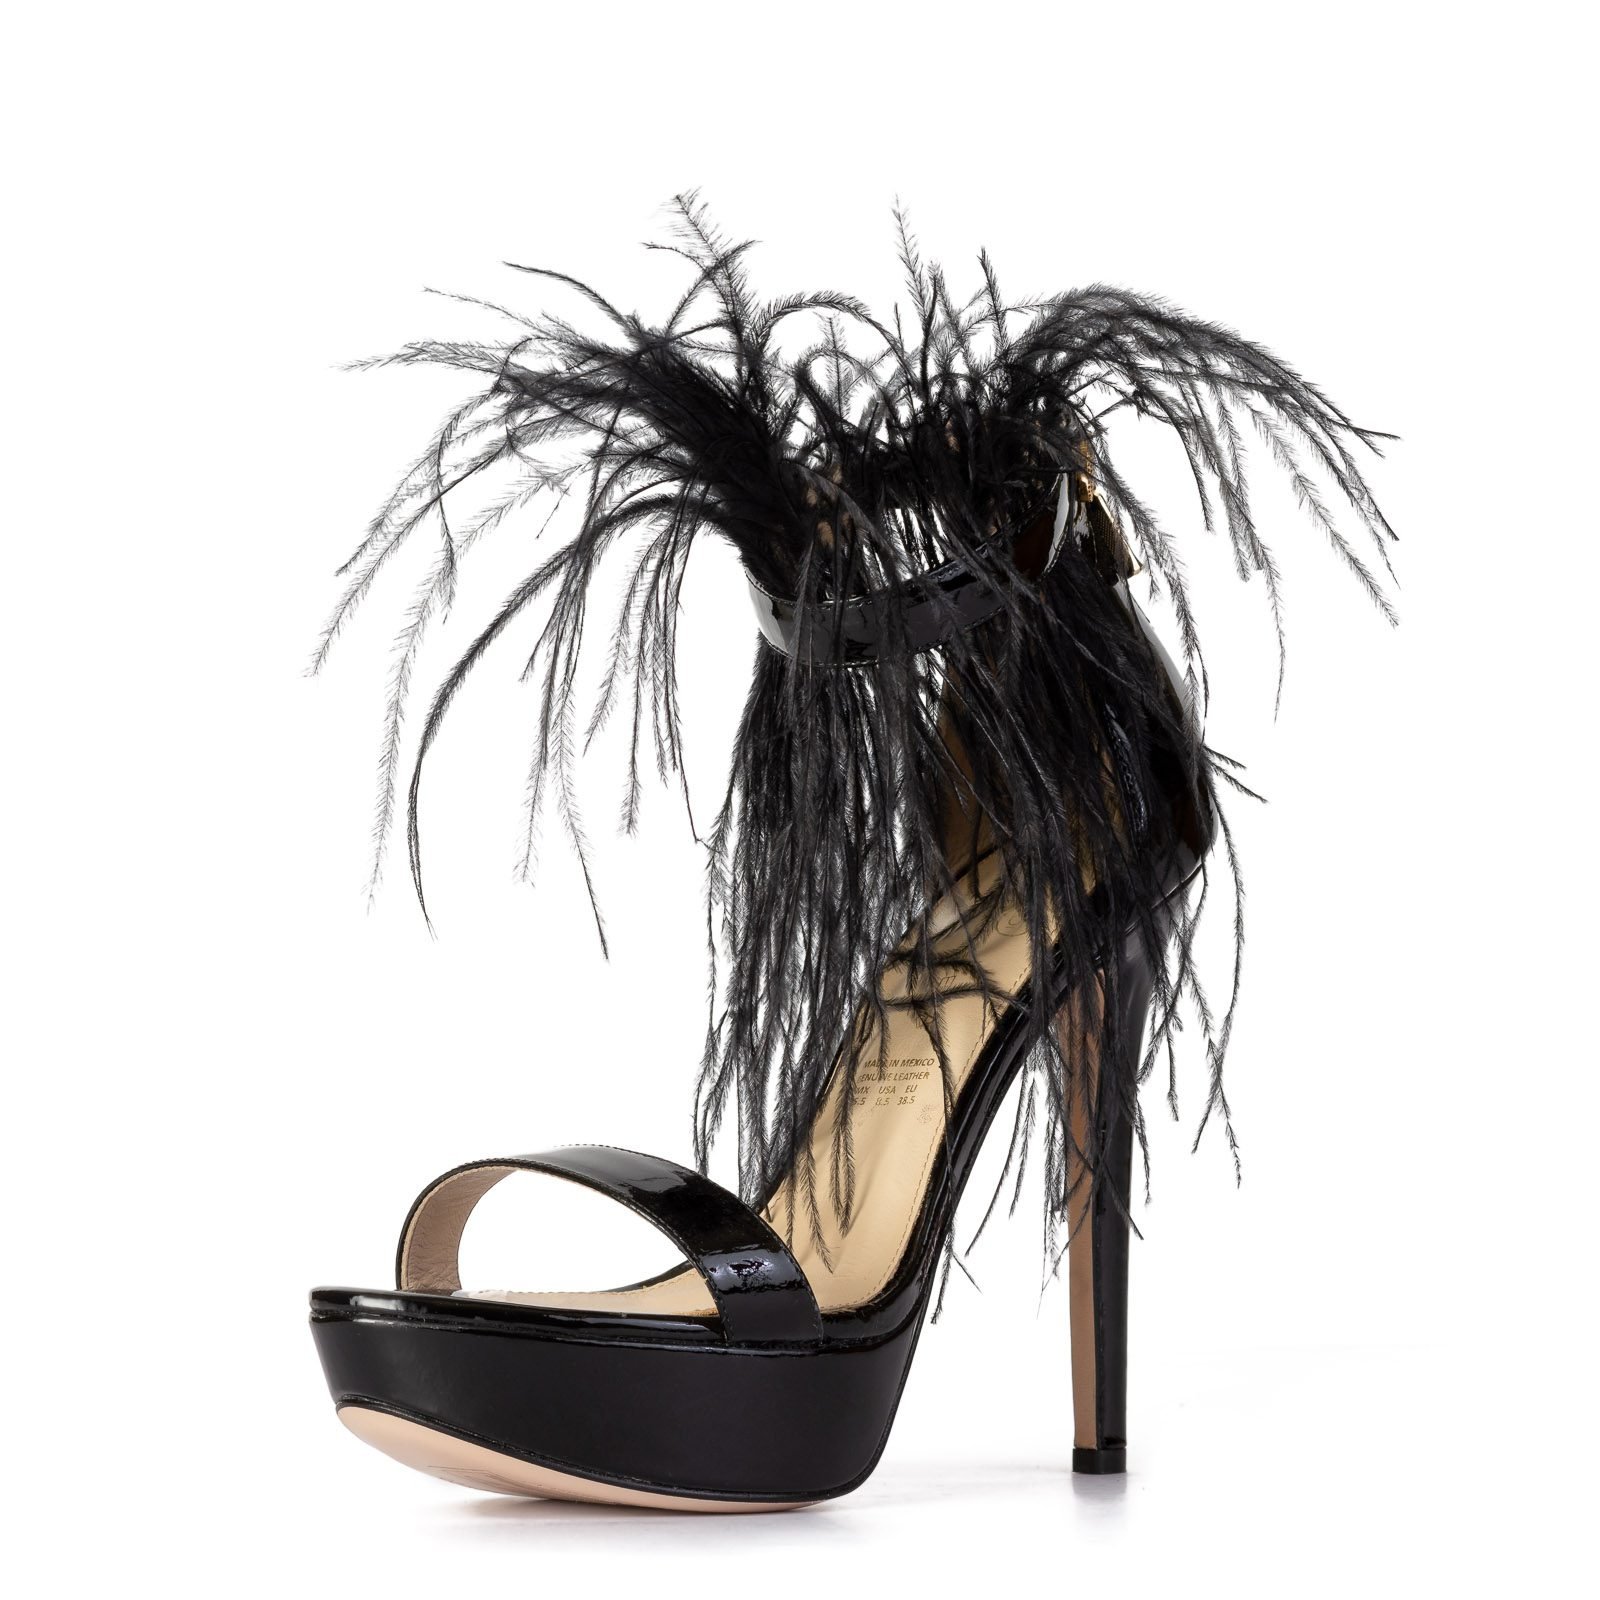 Wide shoes with feathers